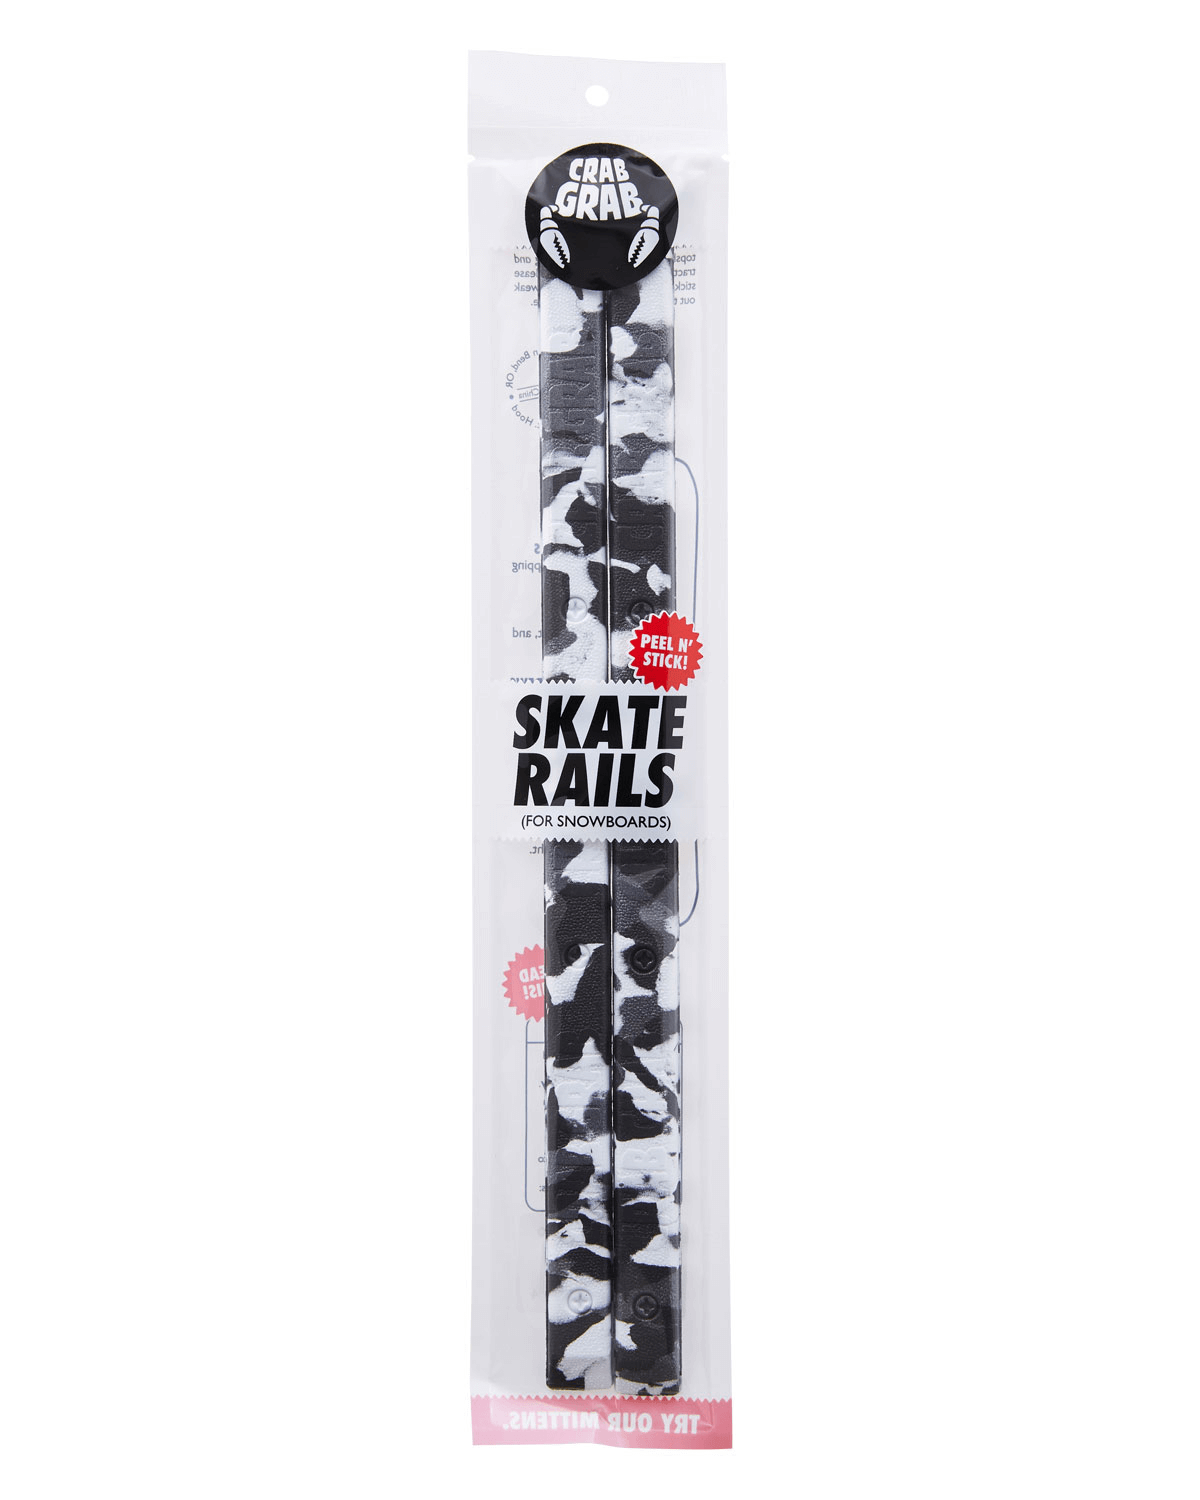 What is a Snowboard Stomp Pad and How Do I Install One?